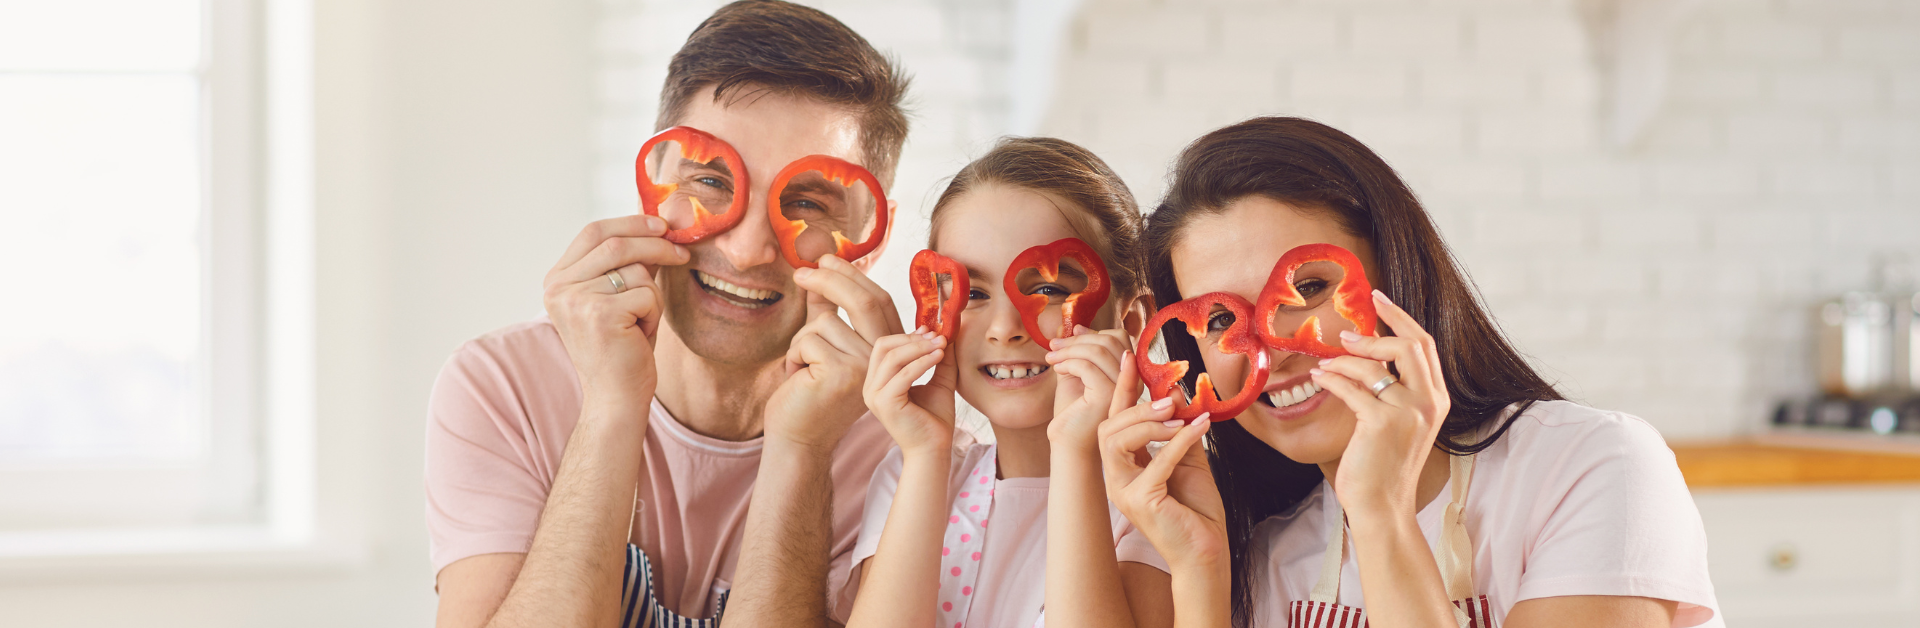 happy family playing with red peppers